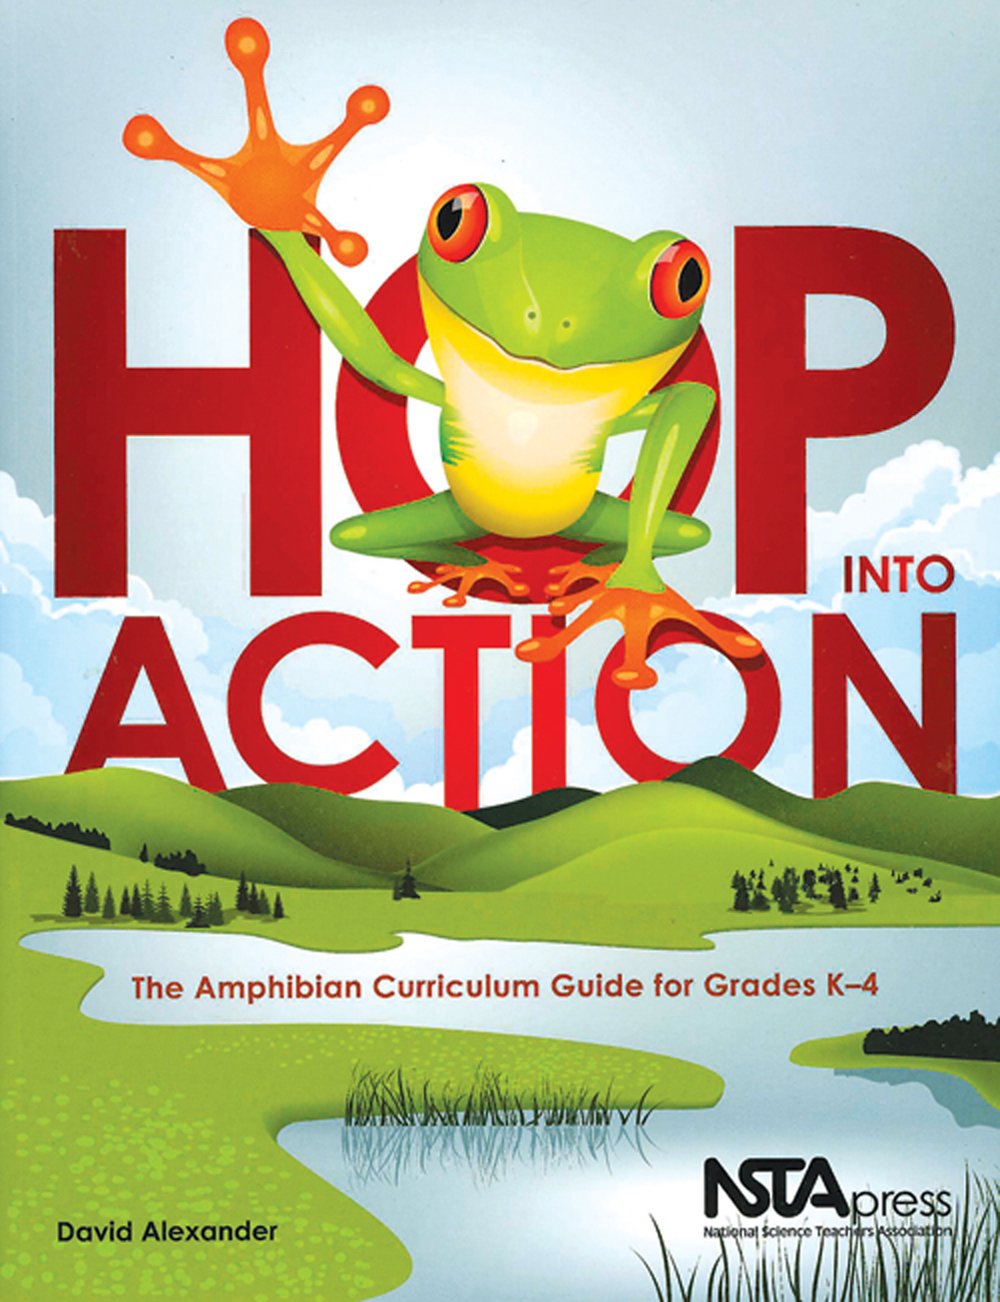 Hop Into Action: The Amphibian Curriculum Guide for Grades K-4